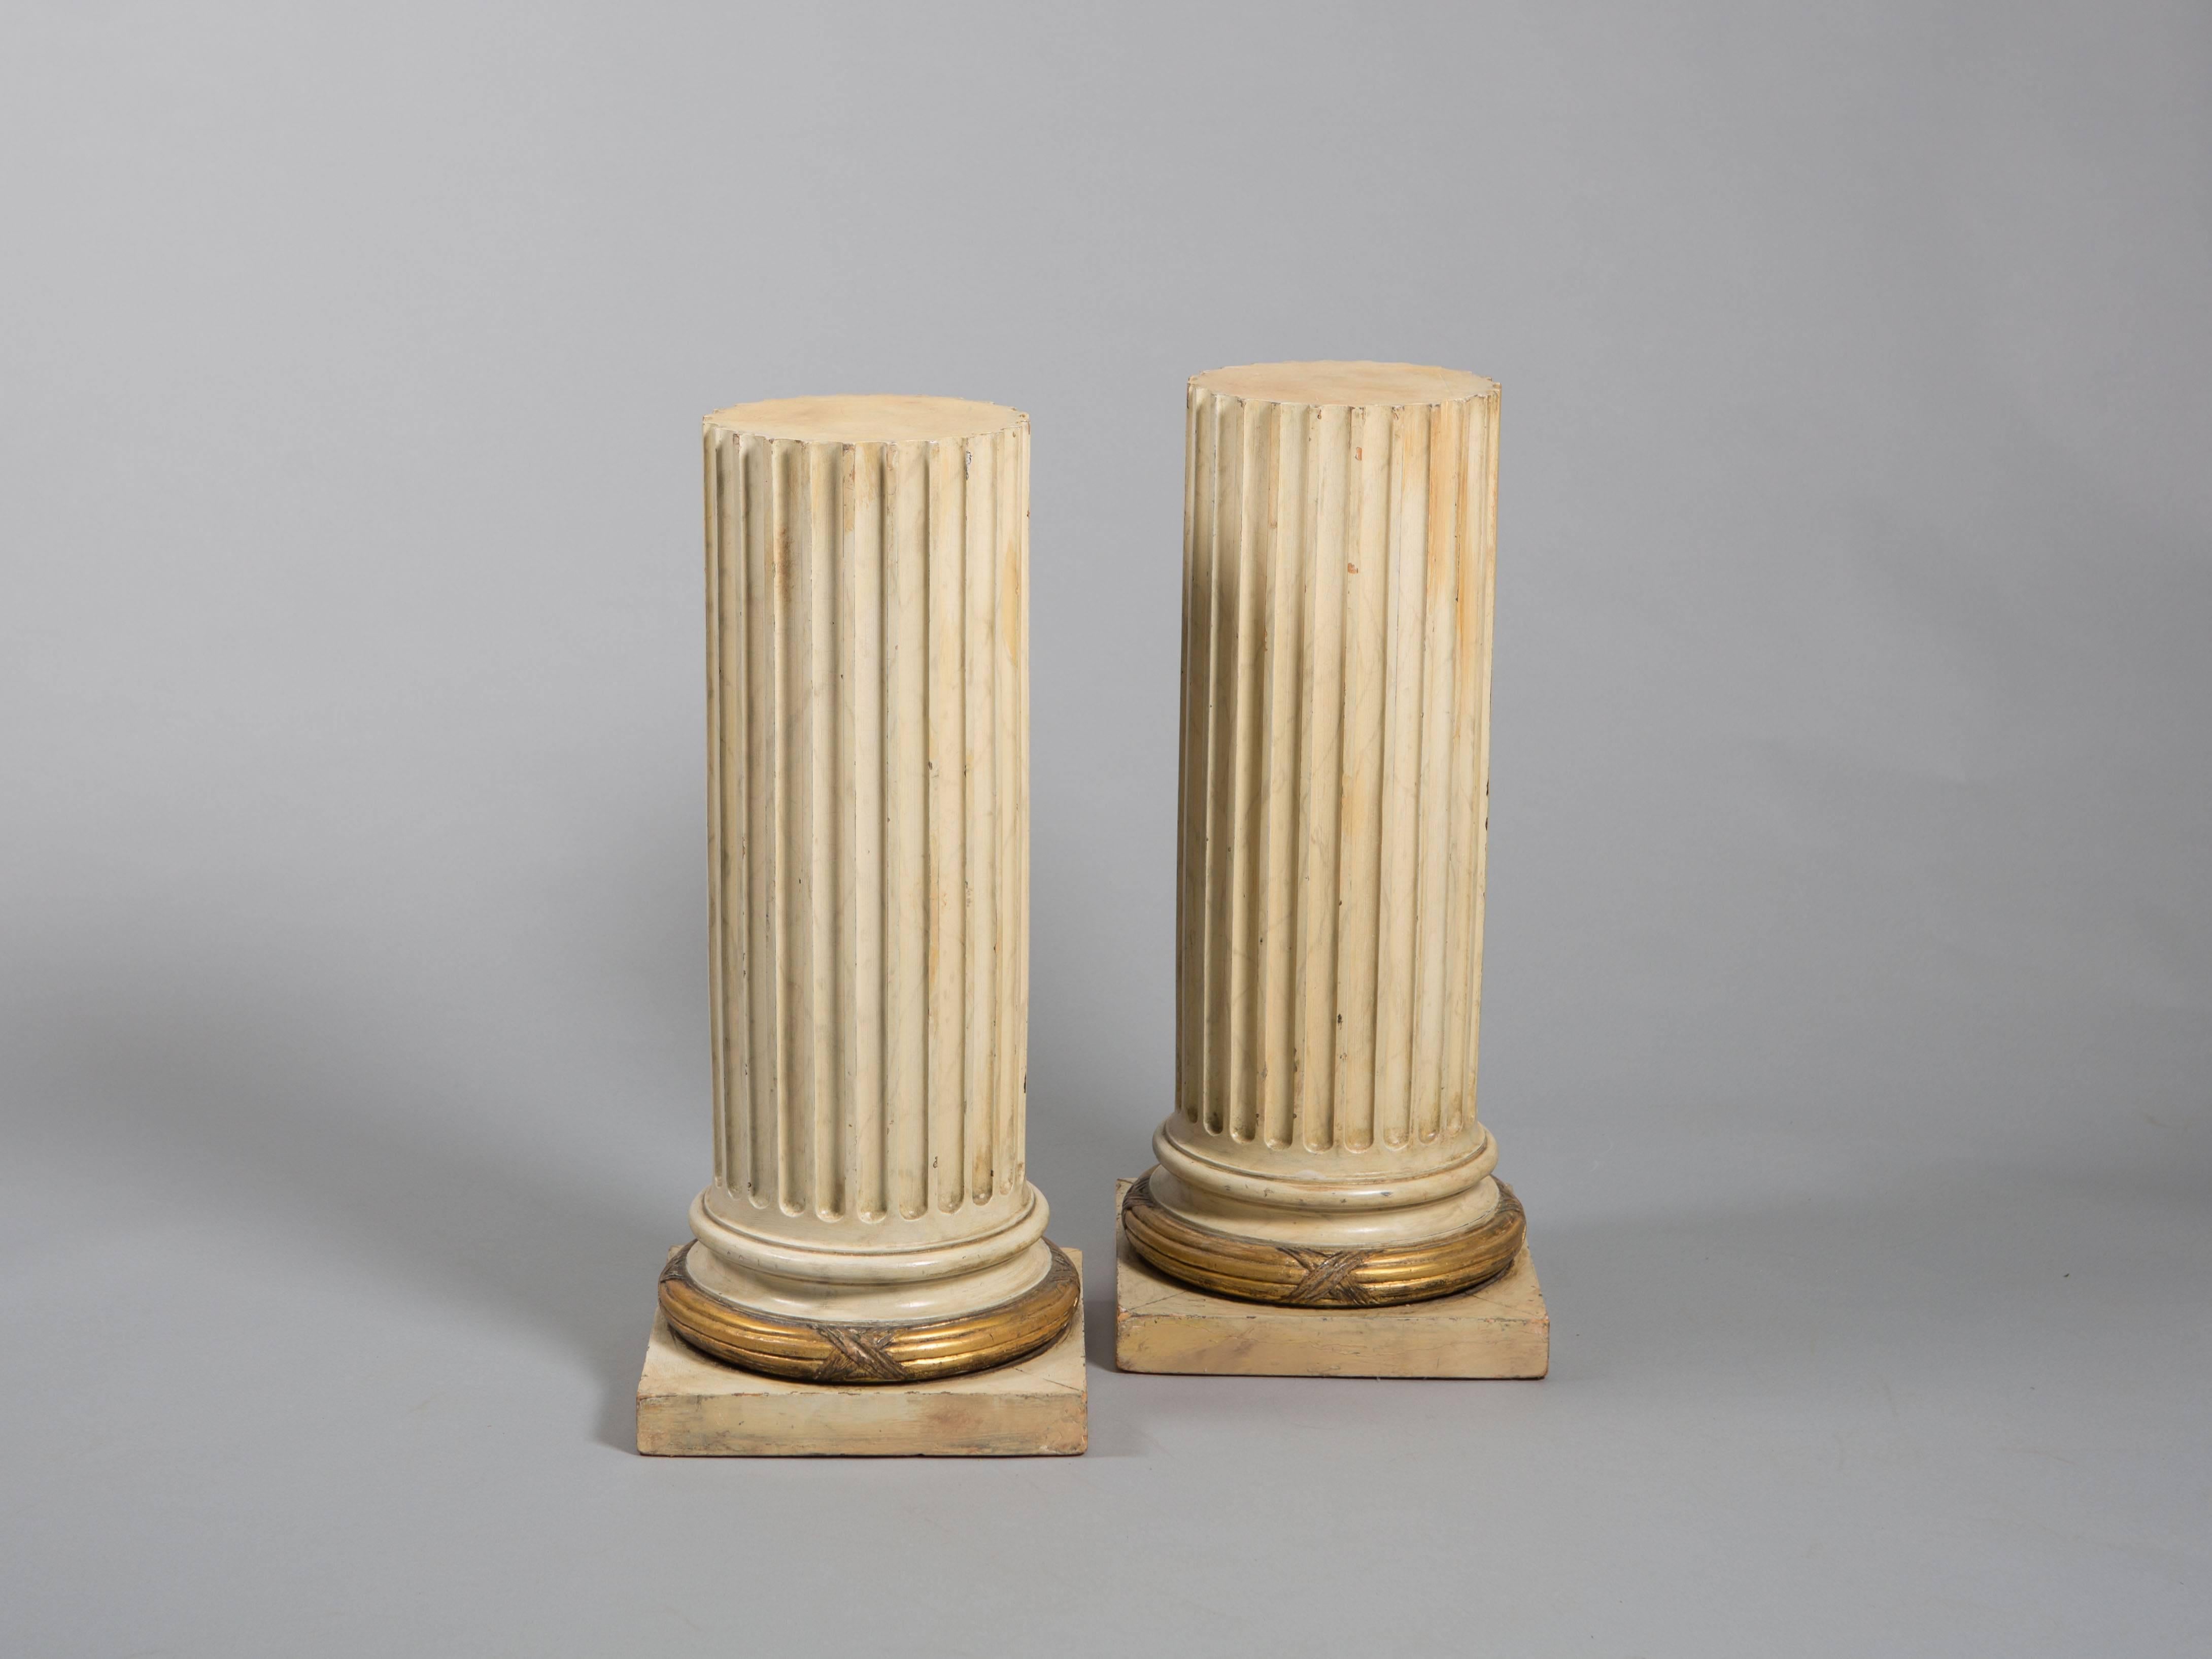 Pair of wood fluted columns with gilt band on base. Columns show their age beautifully. Small cracks in base that do not effect their structural integrity.